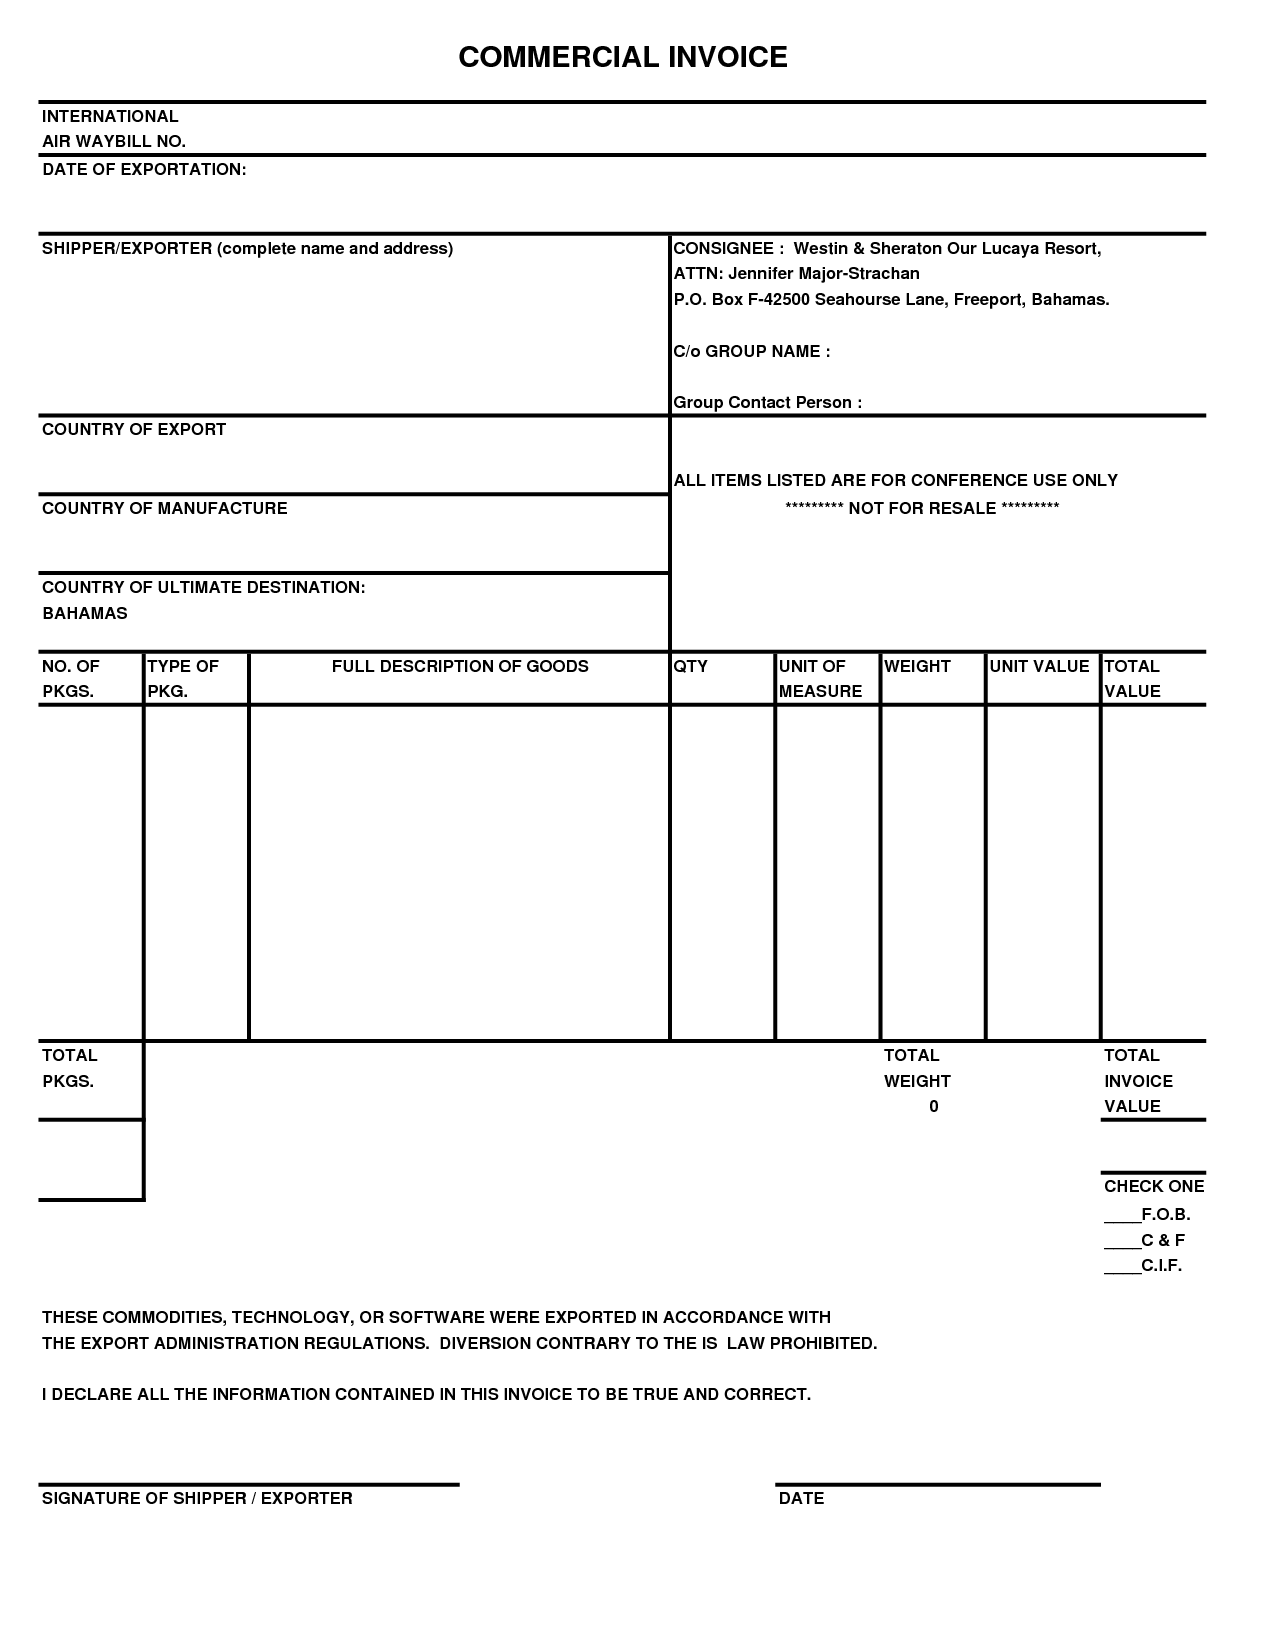 Doc.#600716: Comercial Invoice Template – 11 Commercial Invoice 